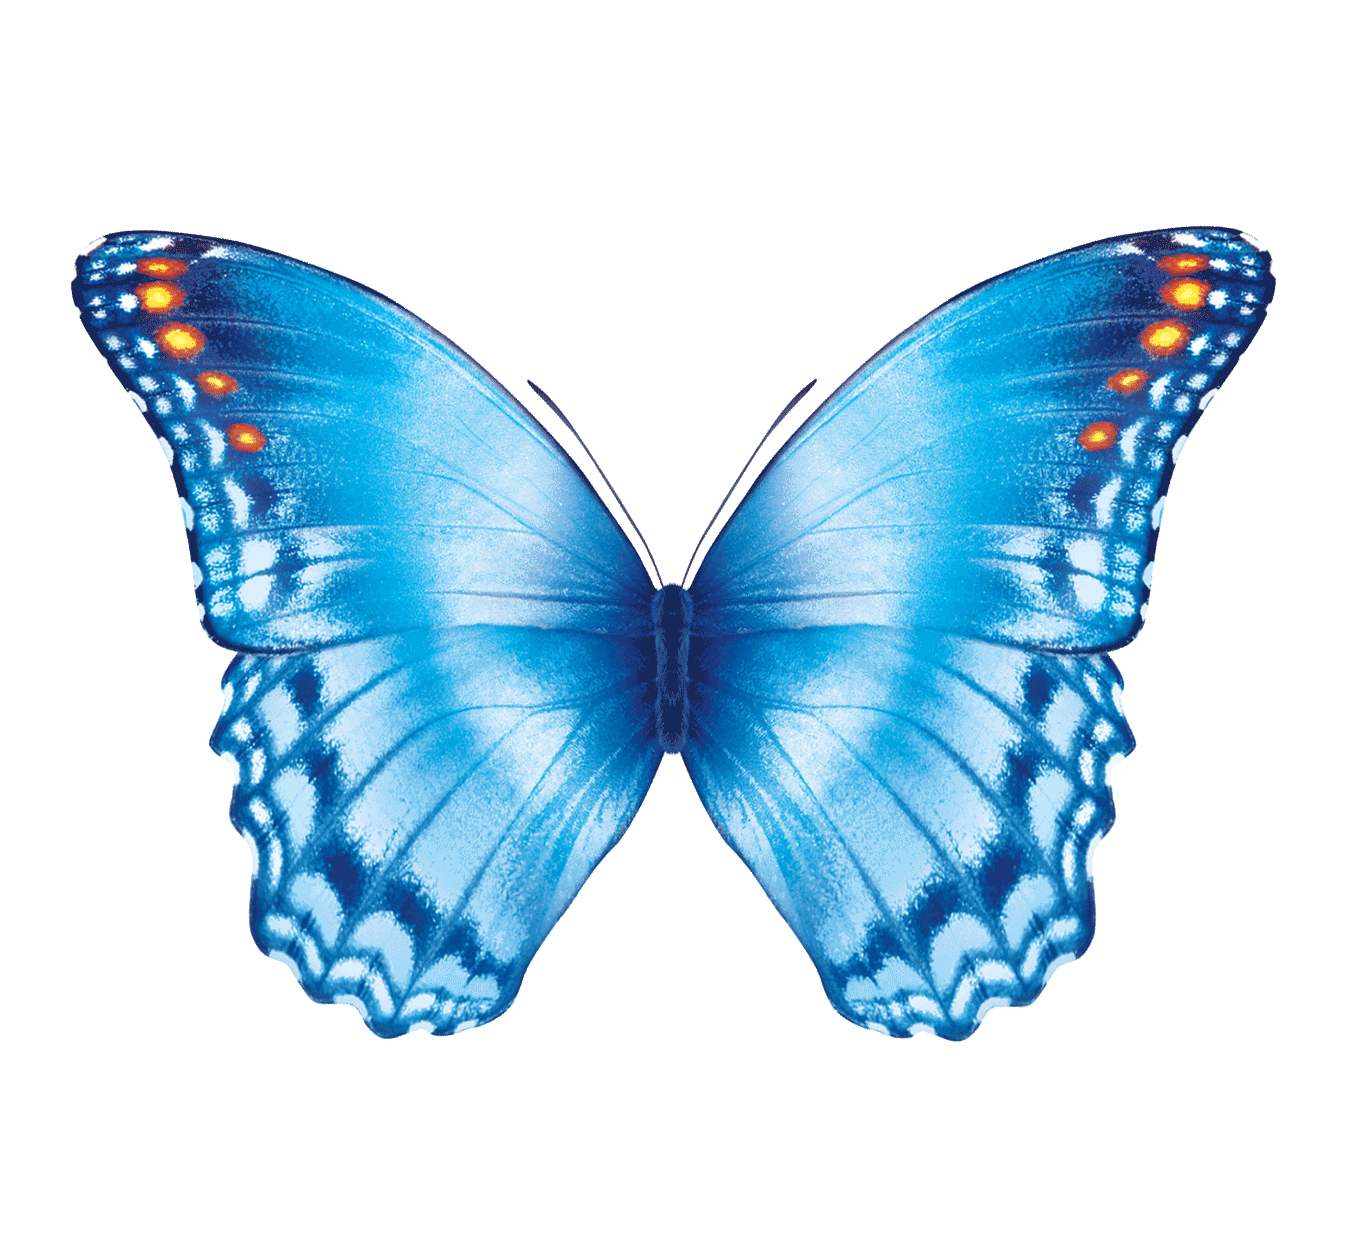 Transparent Butterfly Gif Images